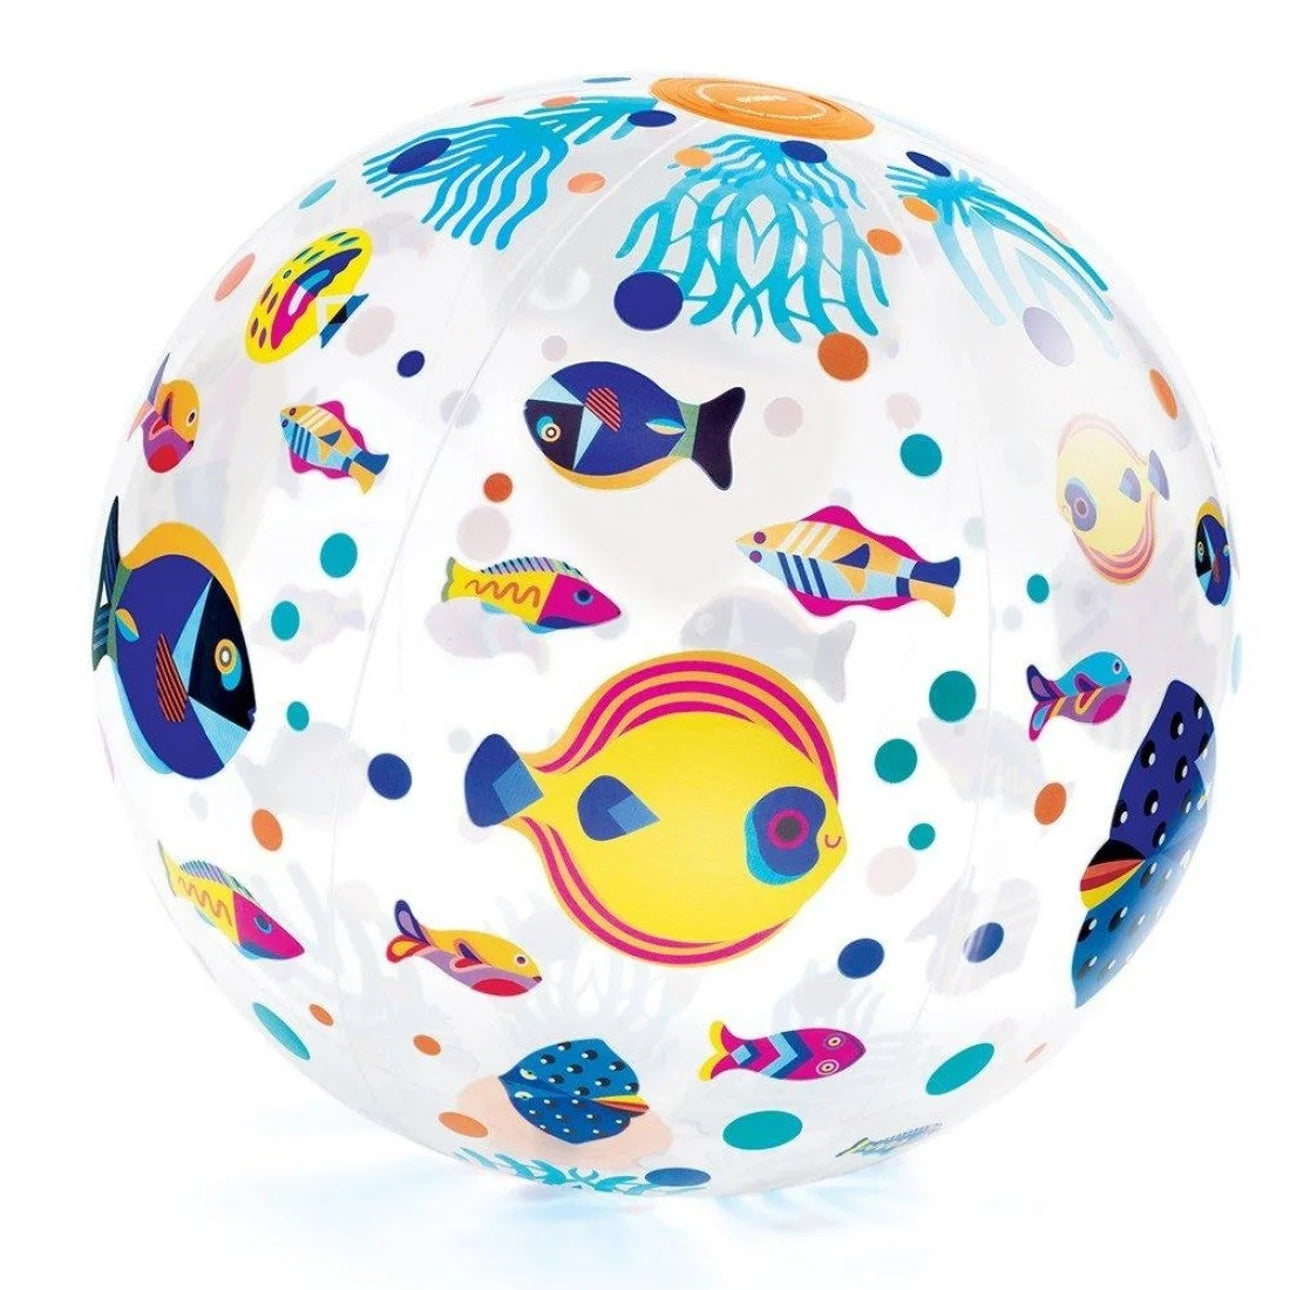 Djeco Inflatable Ball - Fishes